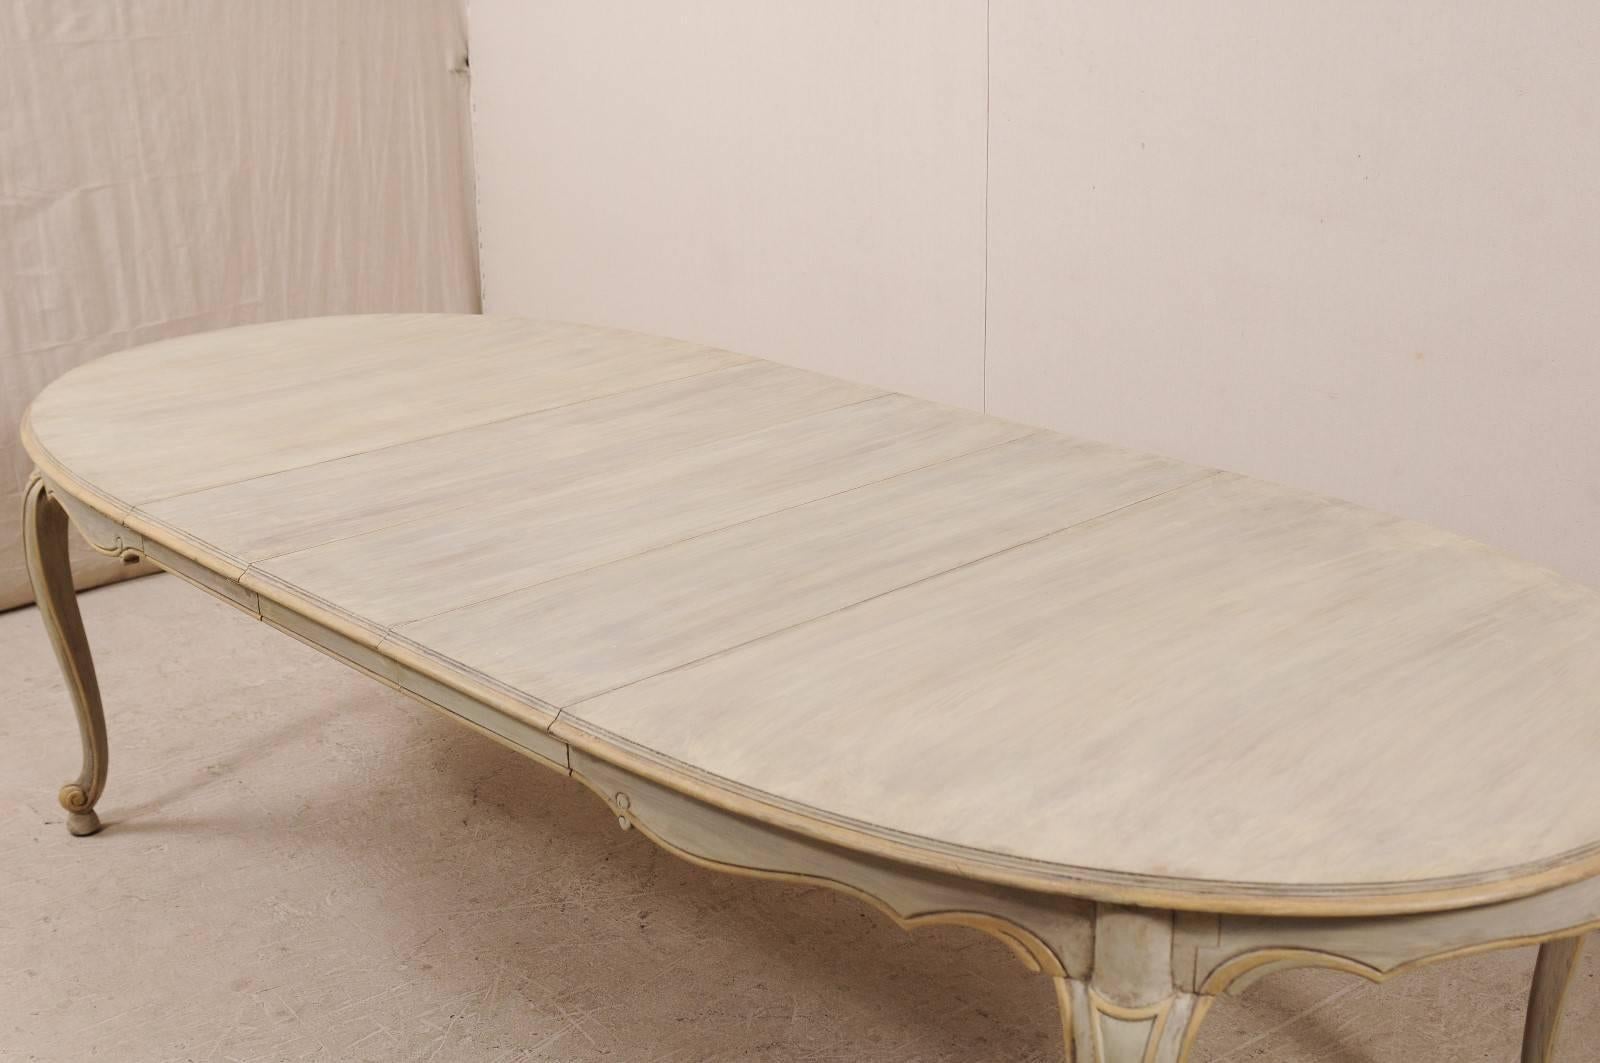 20th Century Lovely Painted Wood Neutral Oval Dining Table with Carved and Outlined Skirt